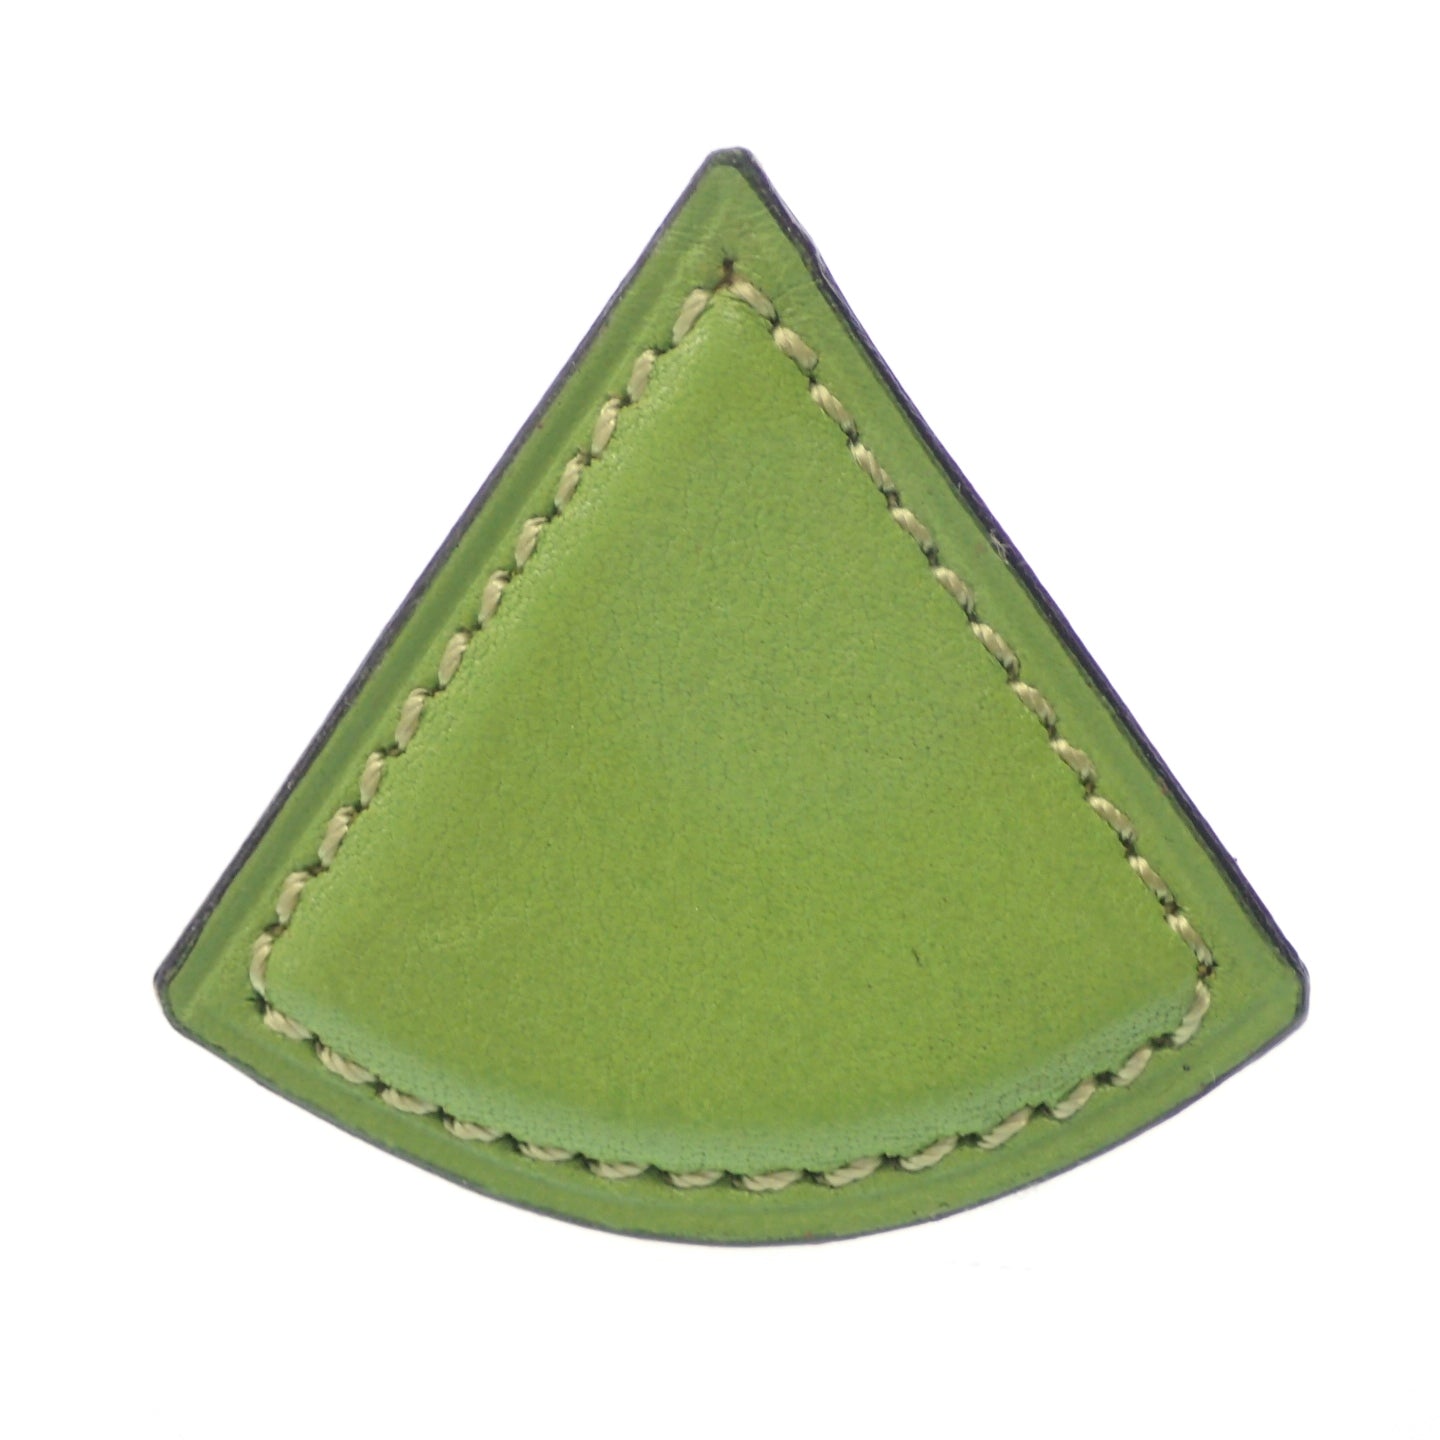 Hermes earrings triangle leather yellow green HERMES [AFI13] [Used] 